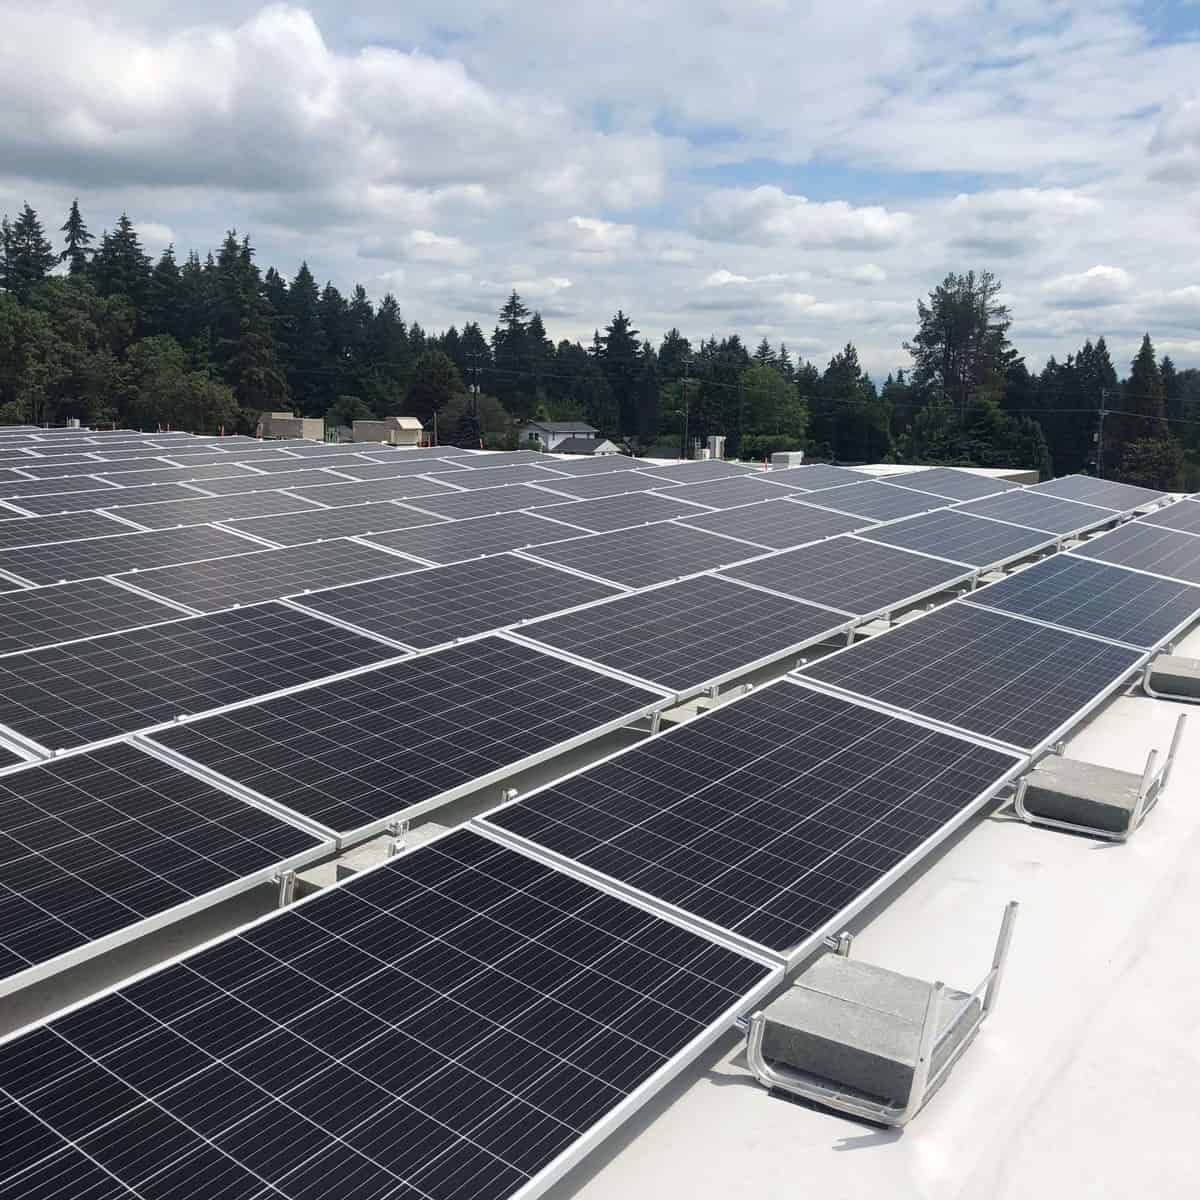 solar panels in commercial setting